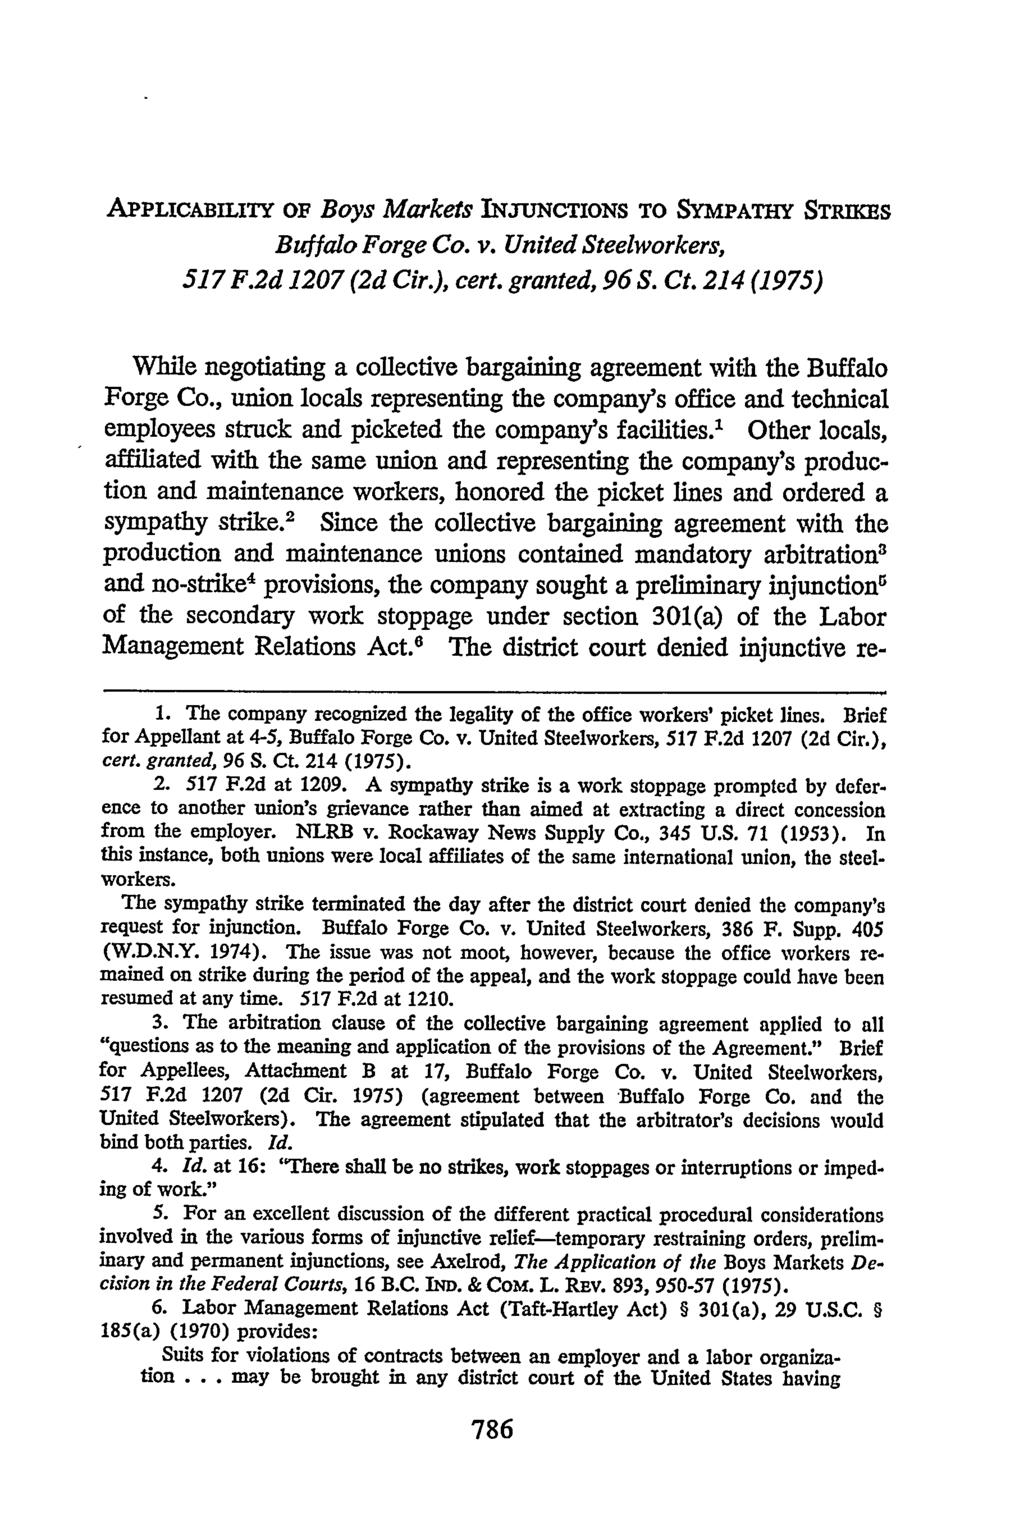 APPLICABILITY OF Boys Markets INJUNCTIONS TO SYMPATHY STRUKMS Buffalo Forge Co. v. United Steelworkers, 517 F.2d 1207 (2d Cir.), cert. granted, 96 S. Ct.